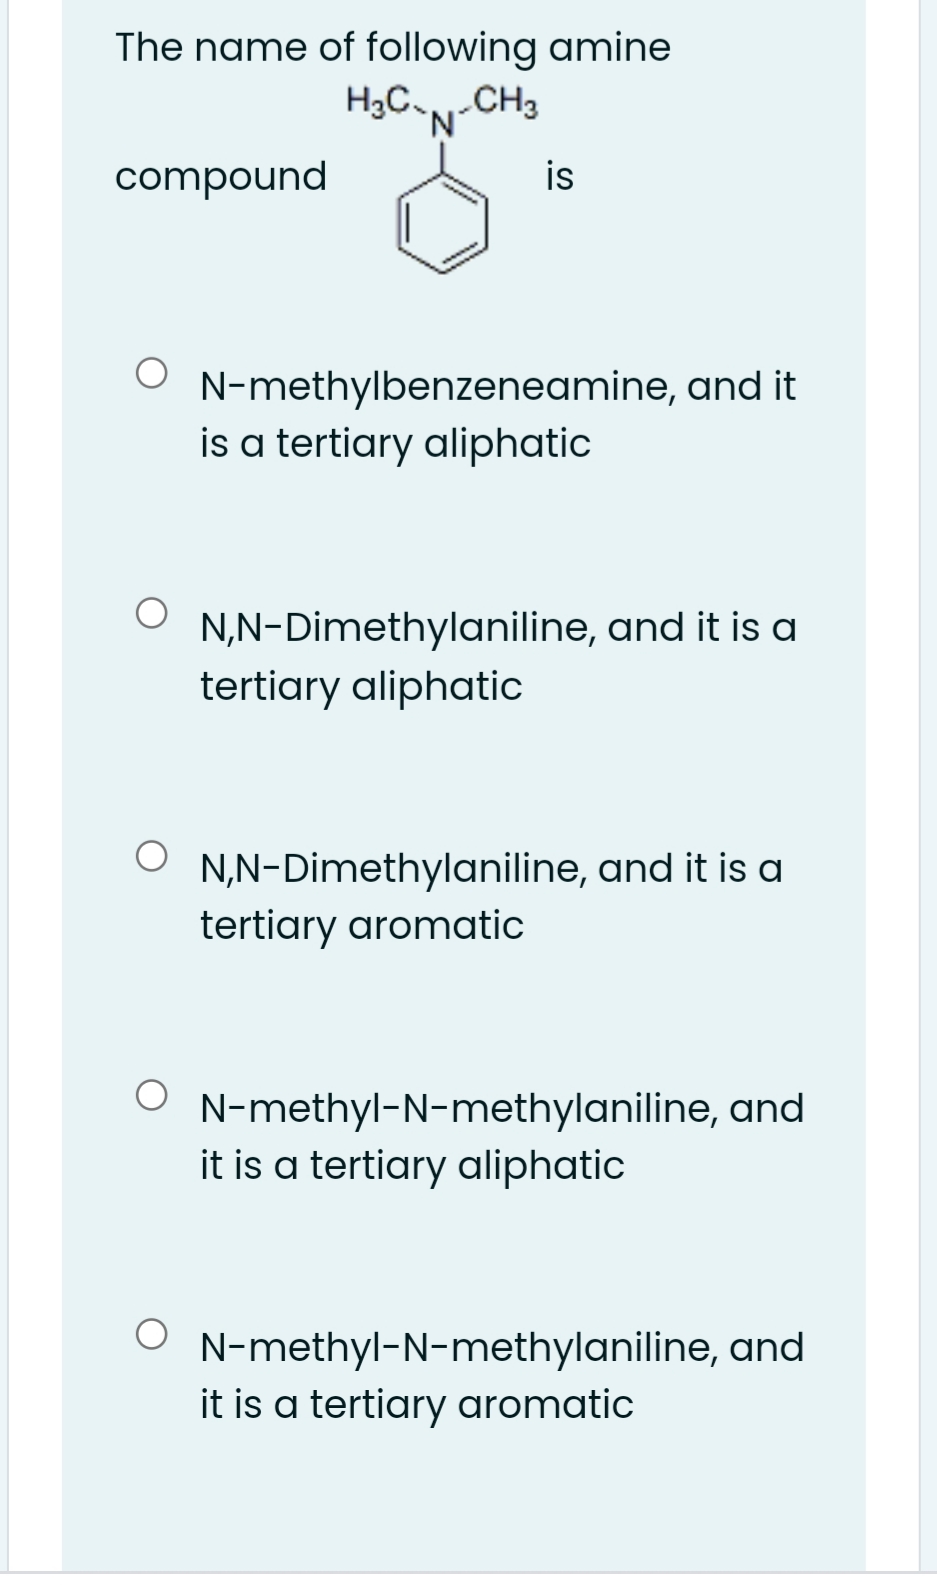 The name of following amine
H3C-CH3
compound
is
N-methylbenzeneamine, and it
is a tertiary aliphatic
N,N-Dimethylaniline, and it is a
tertiary aliphatic
N,N-Dimethylaniline, and it is a
tertiary aromatic
N-methyl-N-methylaniline, and
it is a tertiary aliphatic
N-methyl-N-methylaniline, and
it is a tertiary aromatic
